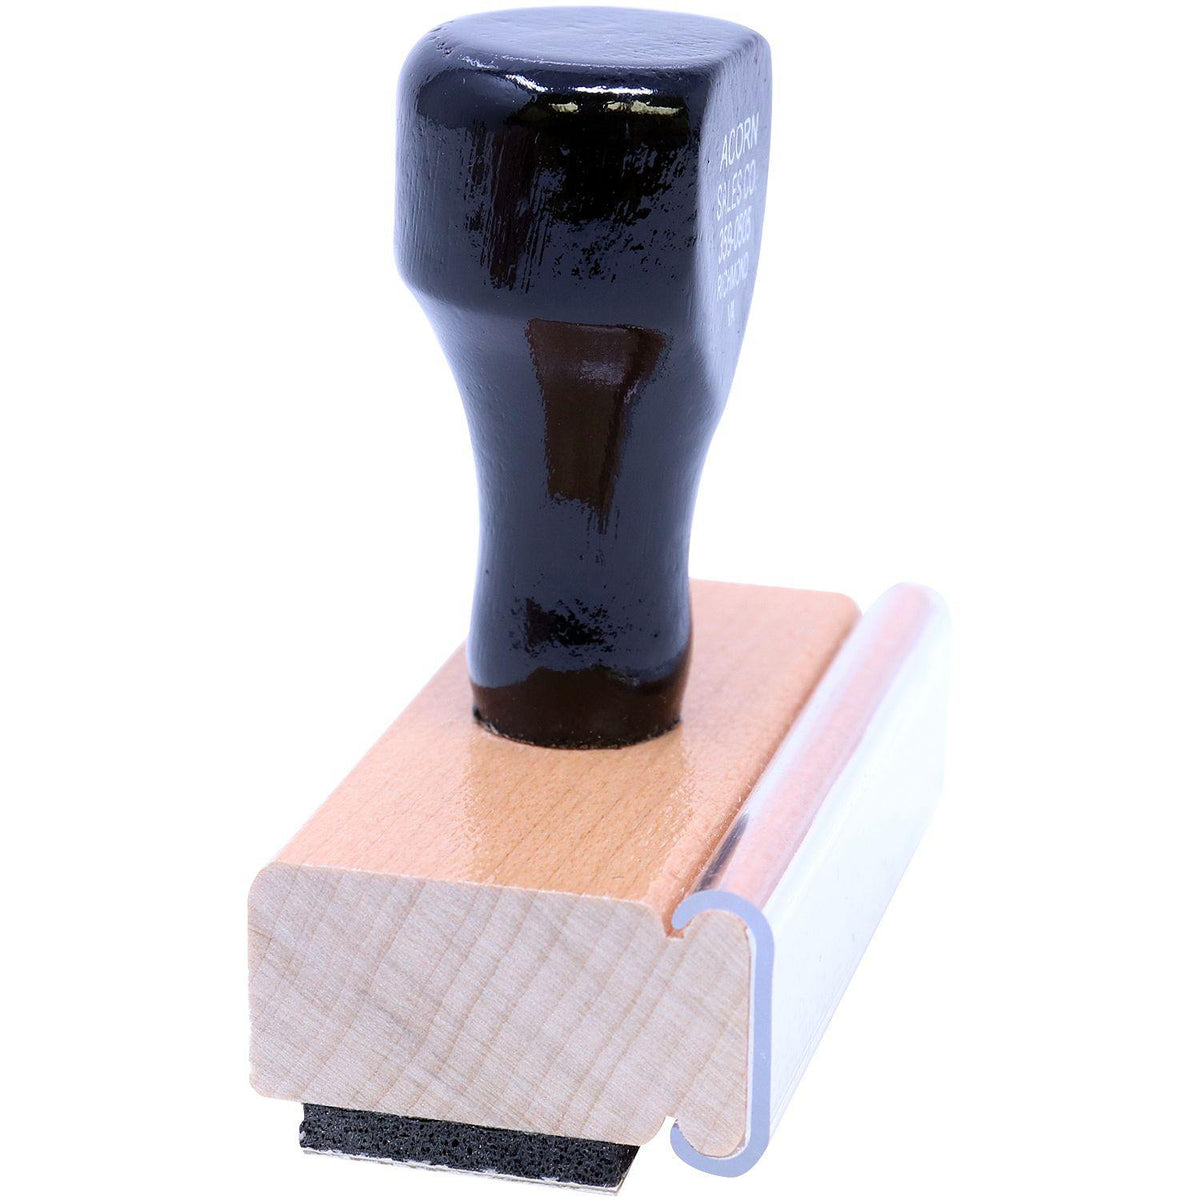 Side View of Cash Only Rubber Stamp at an Angle